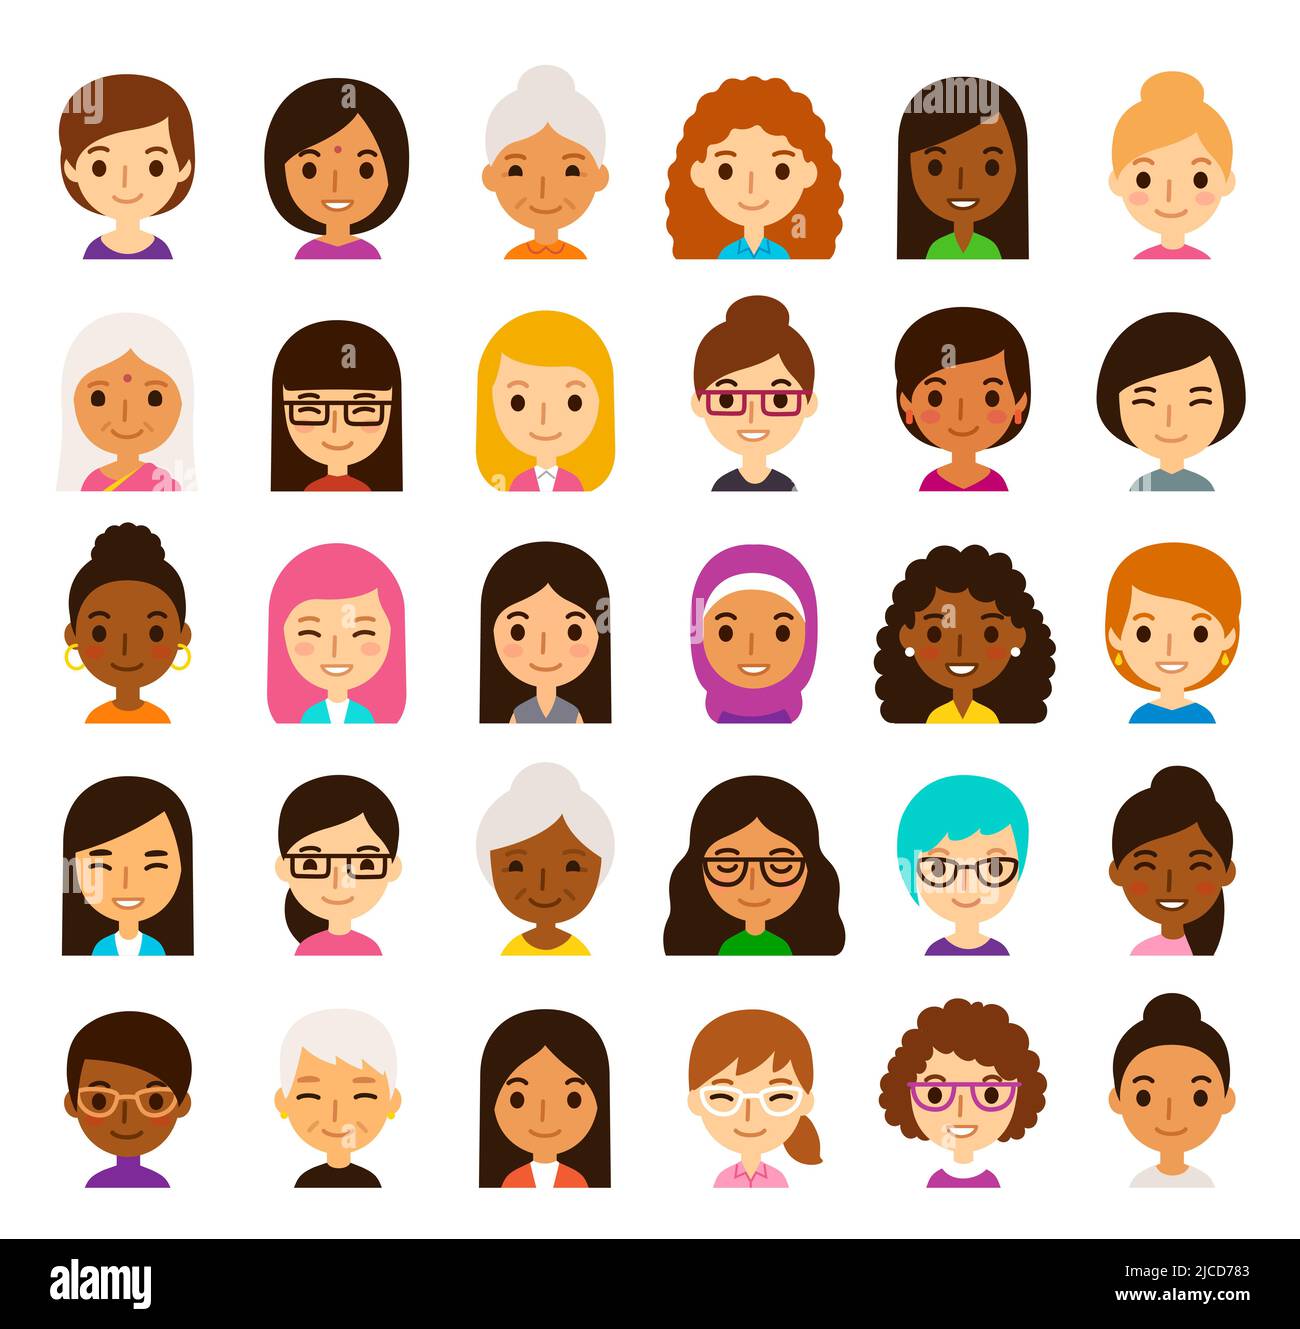 Set of 30 diverse cartoon female avatars. Women of different ethnicities, ages, skin and hair color. Cute and simple flat vector style, isolated on wh Stock Vector